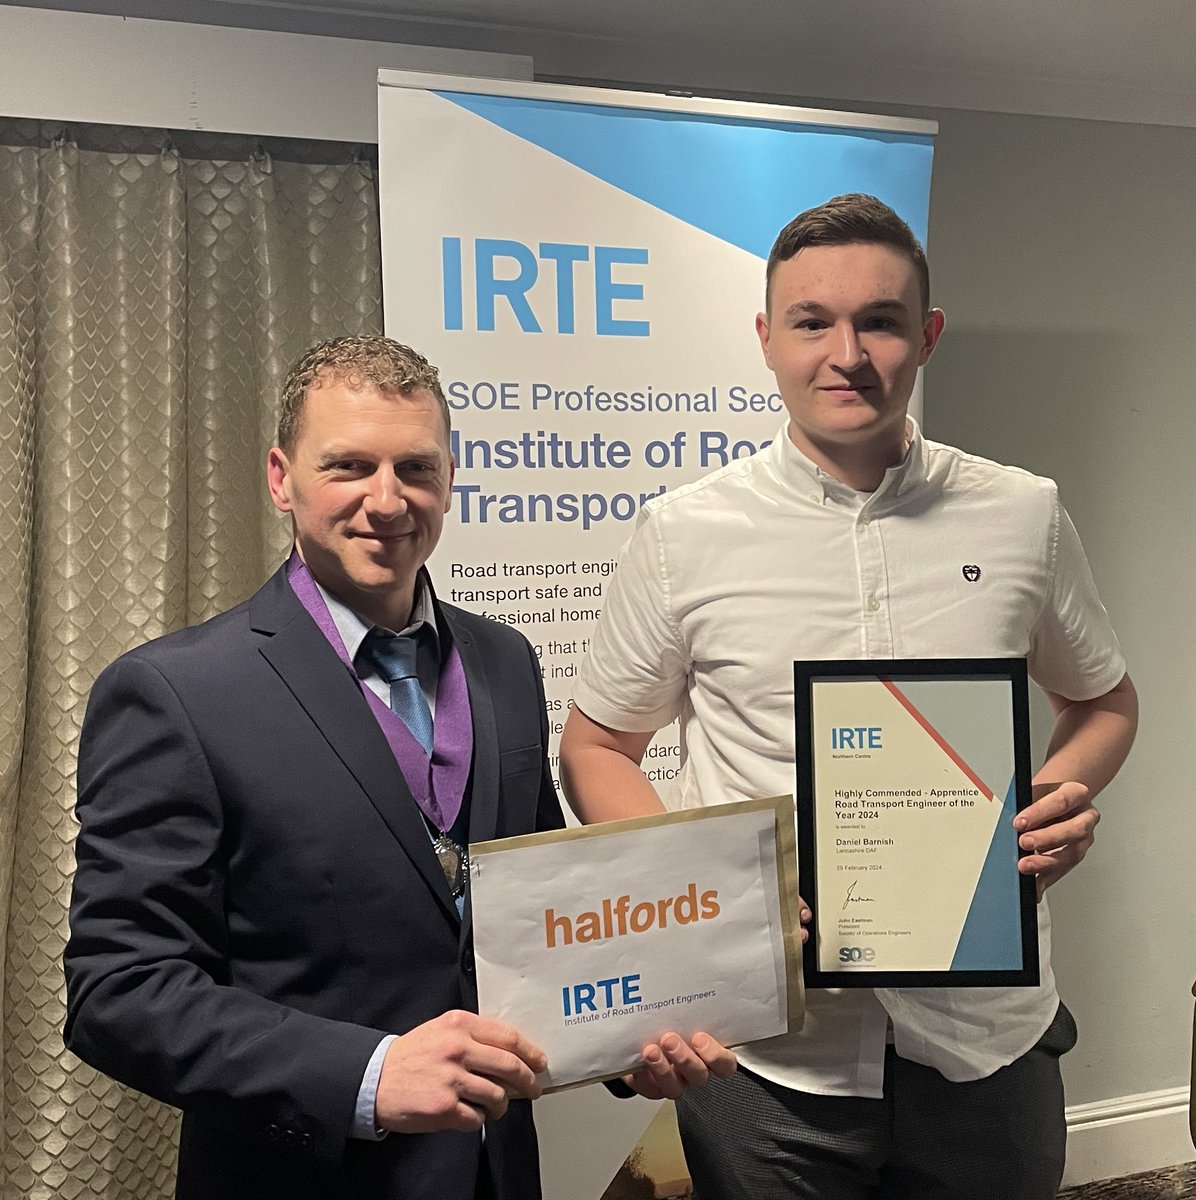 Next up in our finalists for the IRTE Northern Centre Young Engineer of the Year Awards is the next recipient of the Highly Commended Apprentice Road Transport Engineer of the Year Award.

Congratulations to Daniel Barnish of Lancashire DAF!

@LancashireDaf @DAFTrucksUK